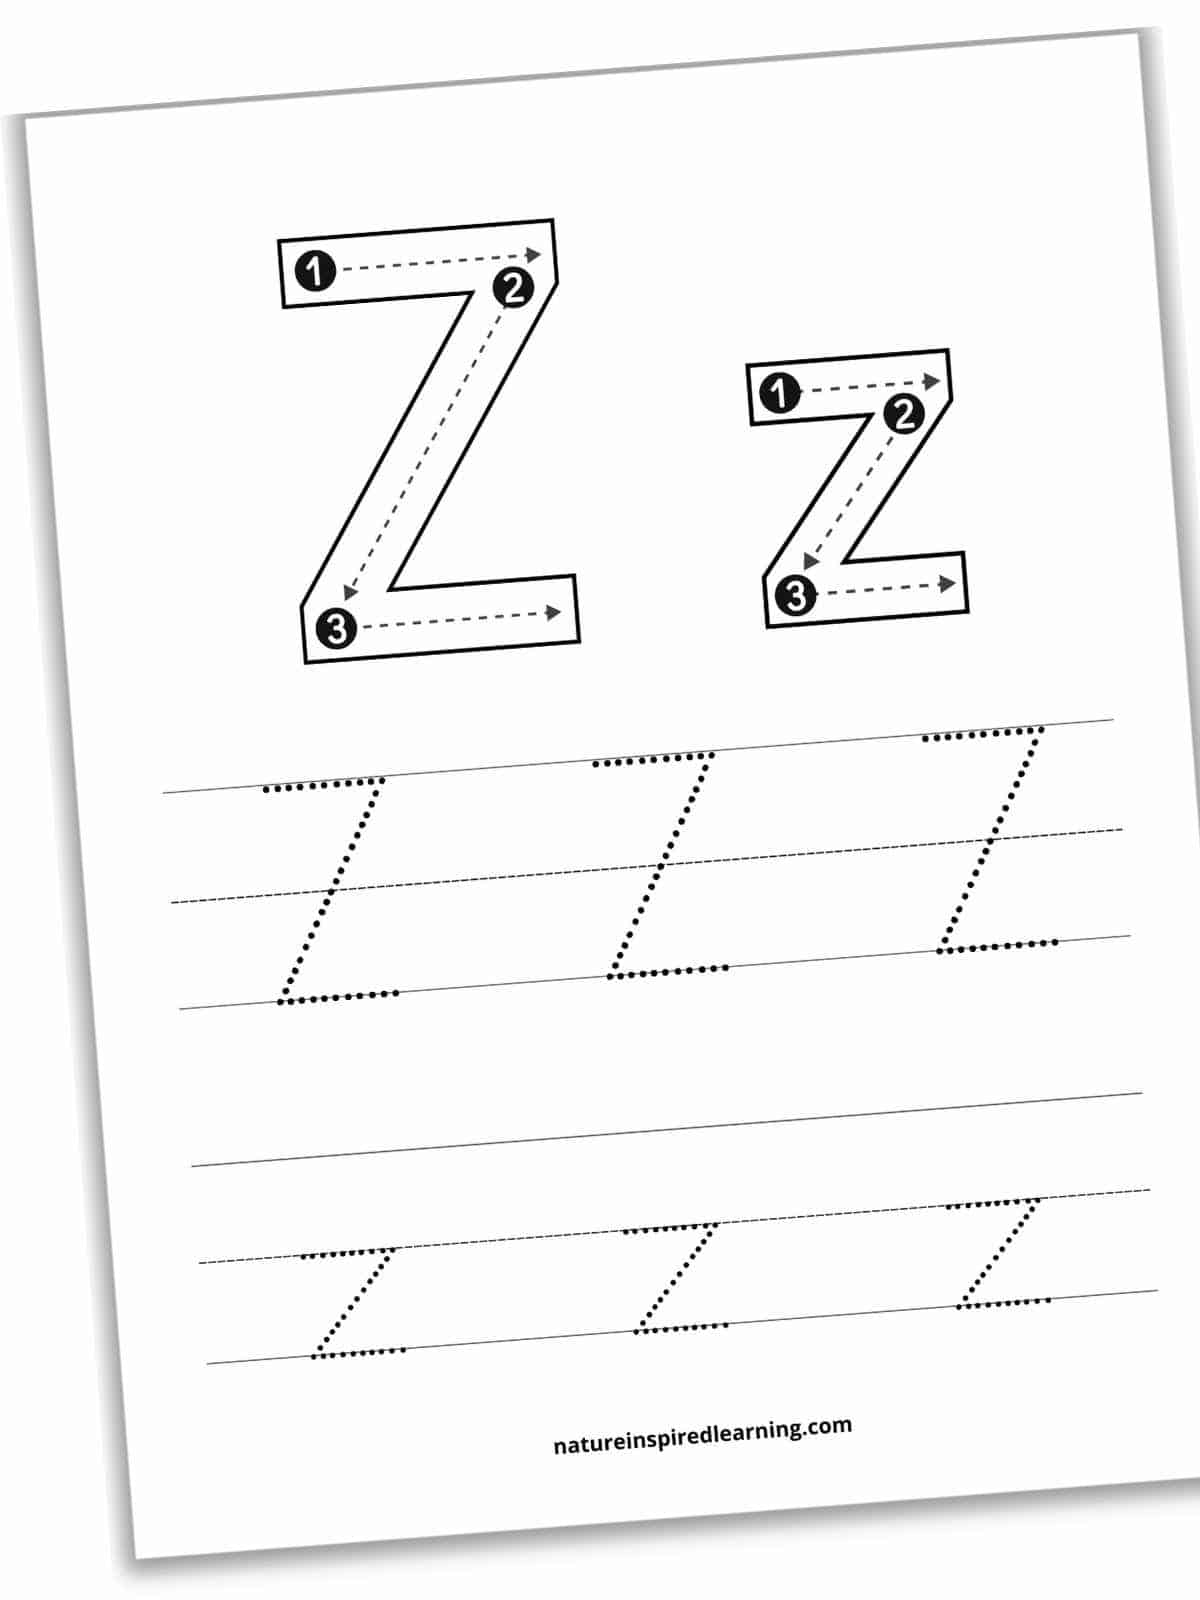 worksheet with a large Z and z with numbers, dashes, and arrows within each large letter. Two lines with z's in dotted font below.